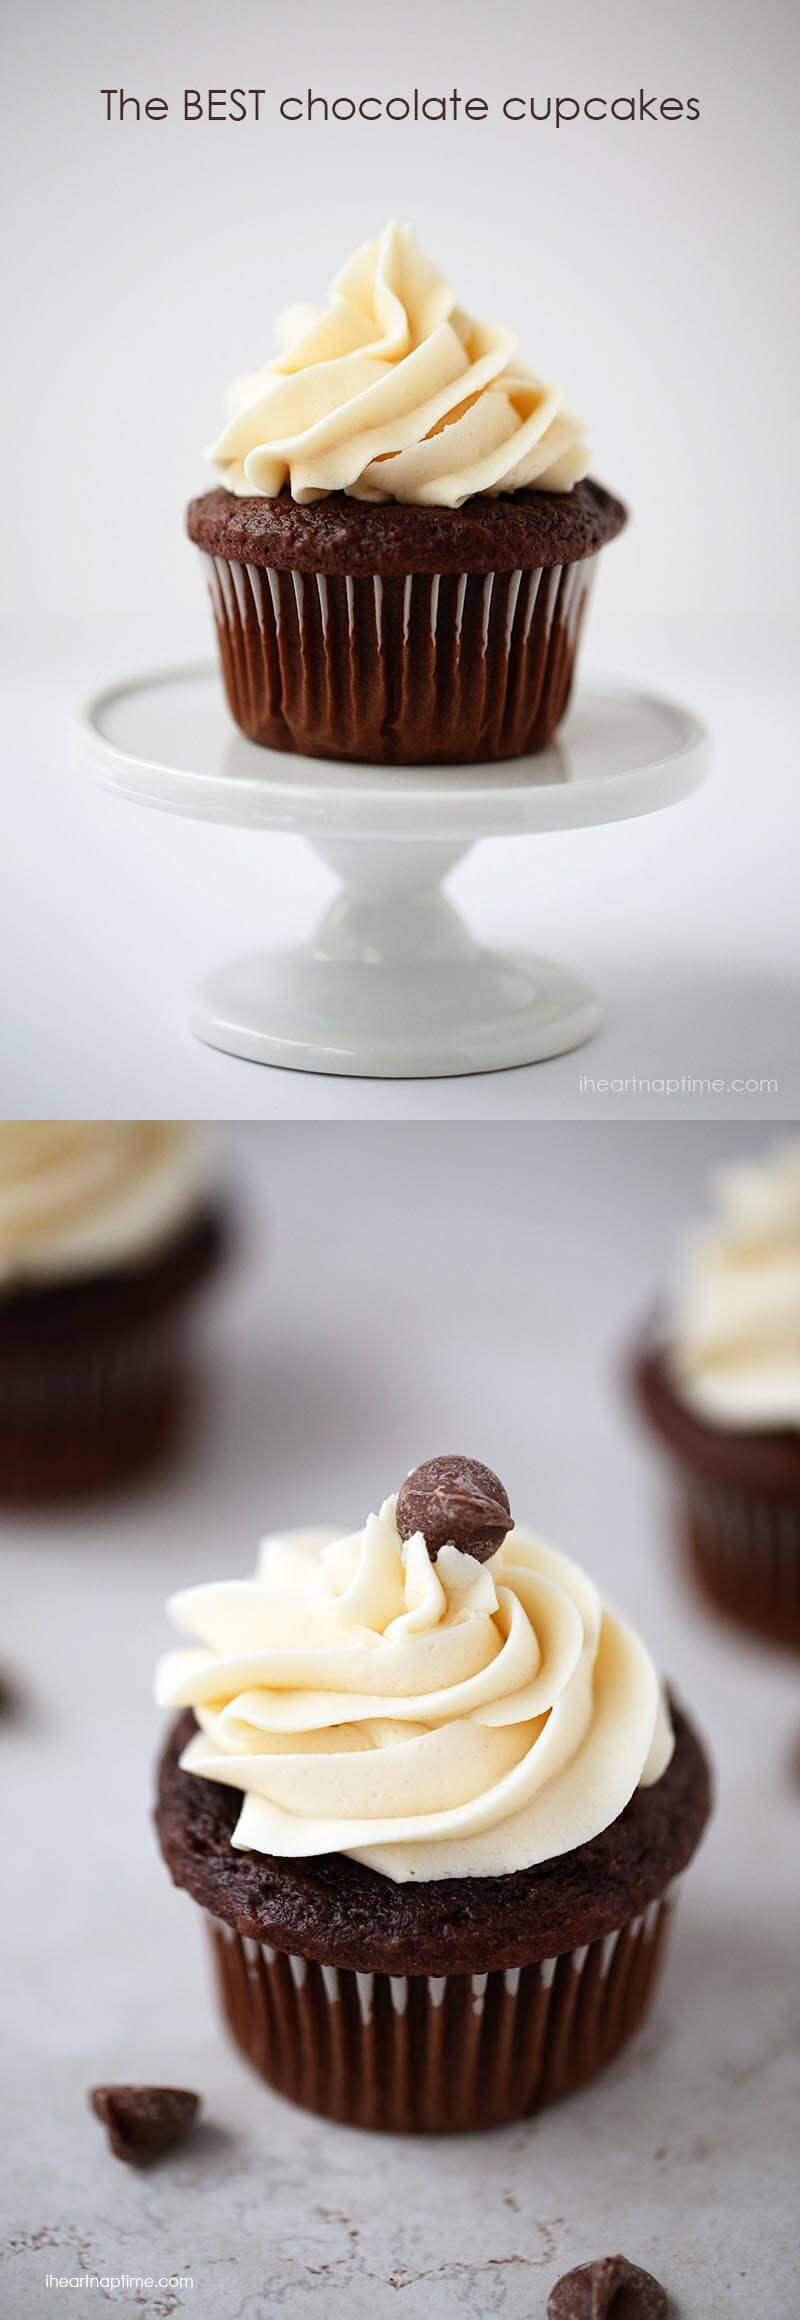 Chocolate Cupcakes Recipe
 The best chocolate cupcakes ever I Heart Nap Time